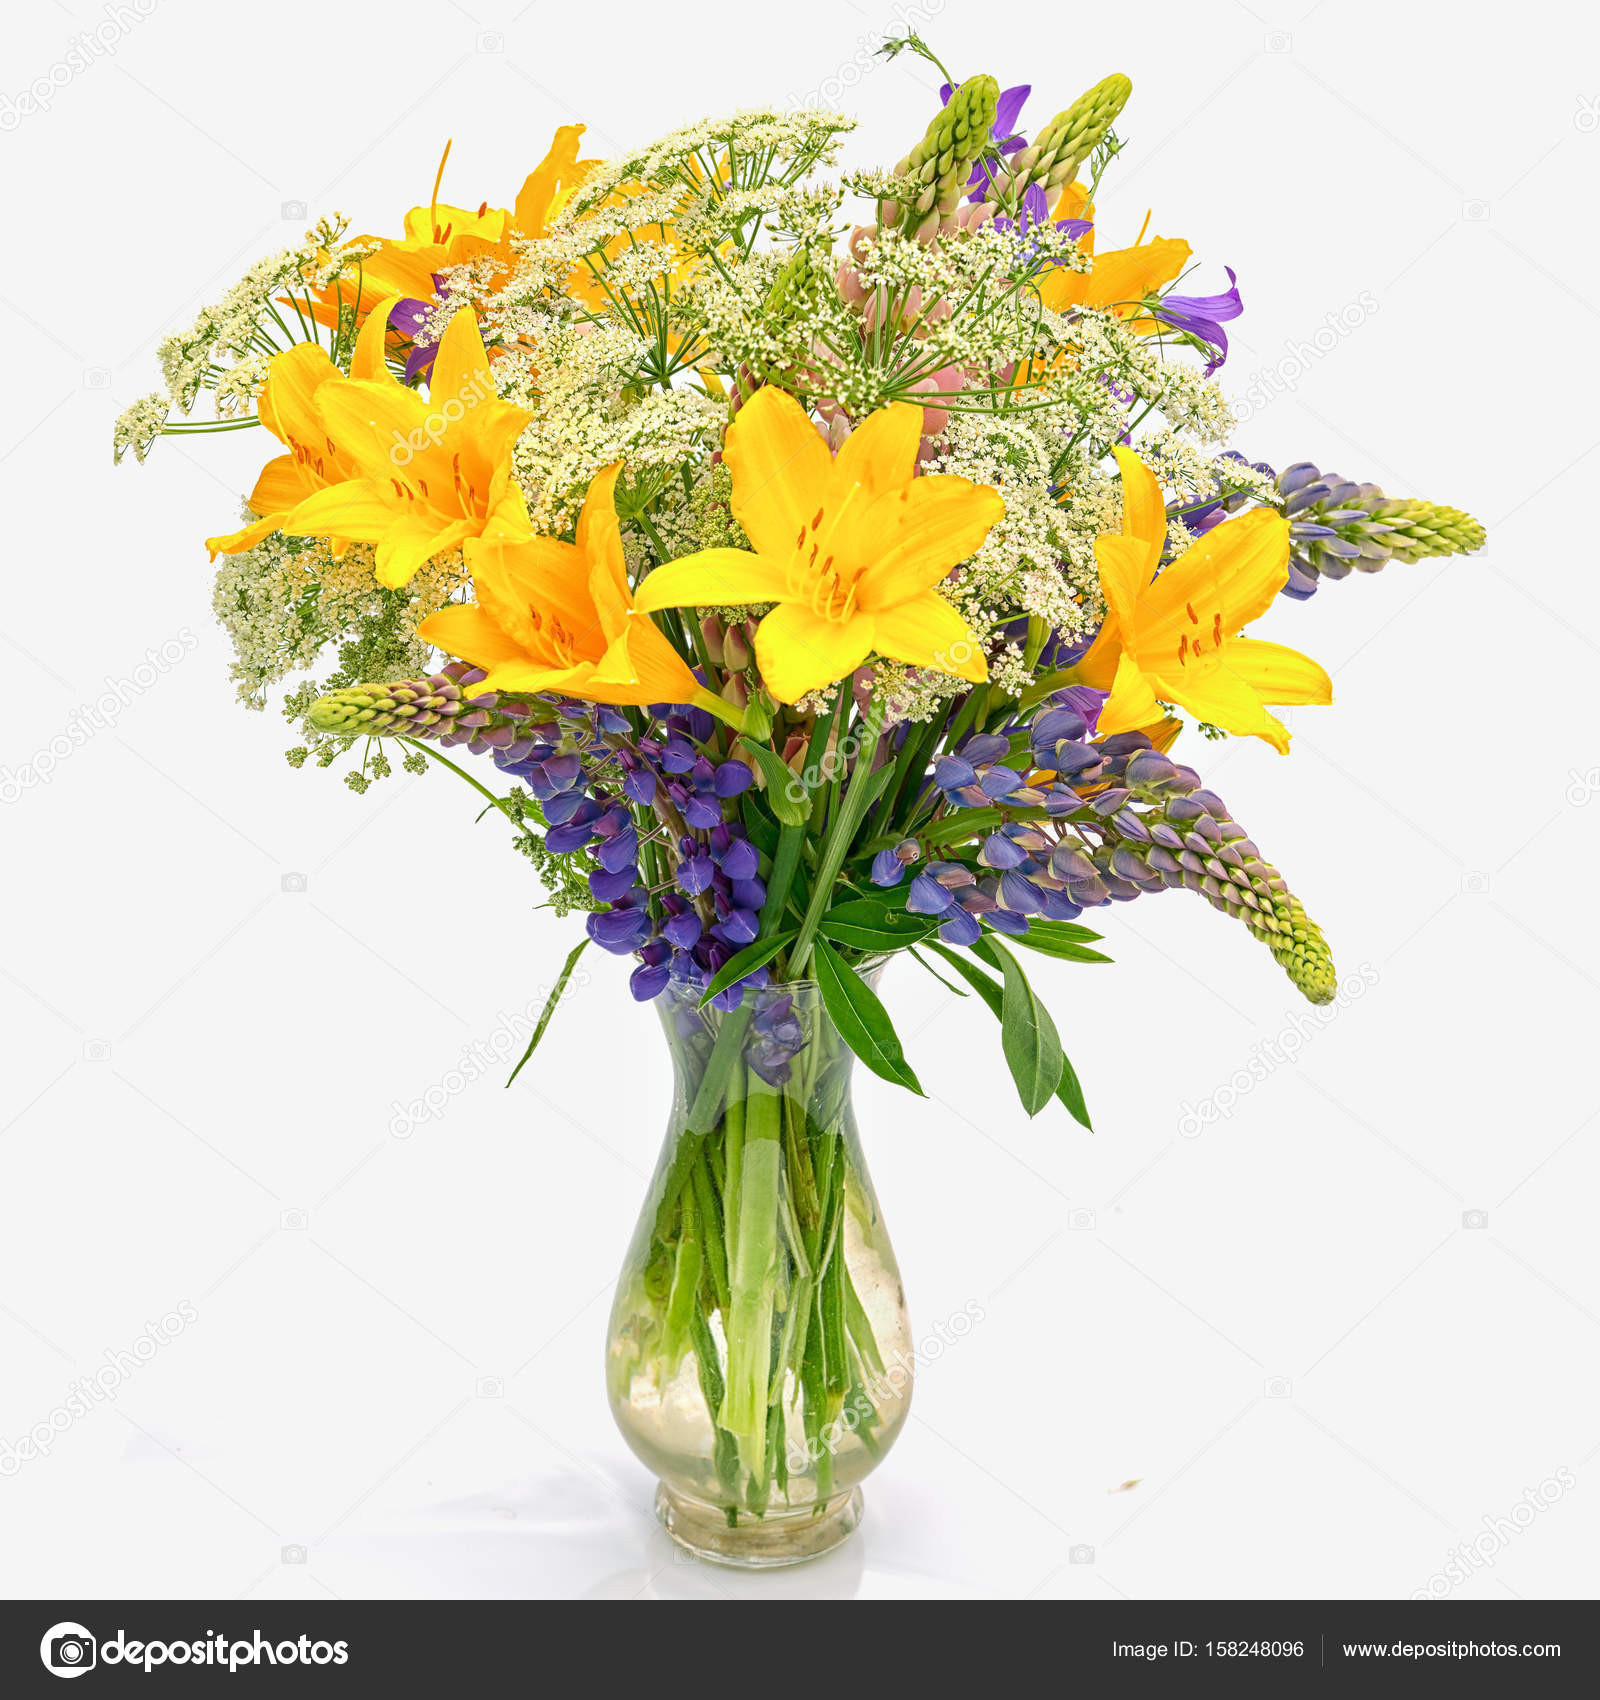 glass cone vase of yellow glass vase images bf142 11km 1200x1200h vases pink flower intended for yellow glass vase photograph bouquet od wild flowers achillea millefolium day lily and lupine of yellow